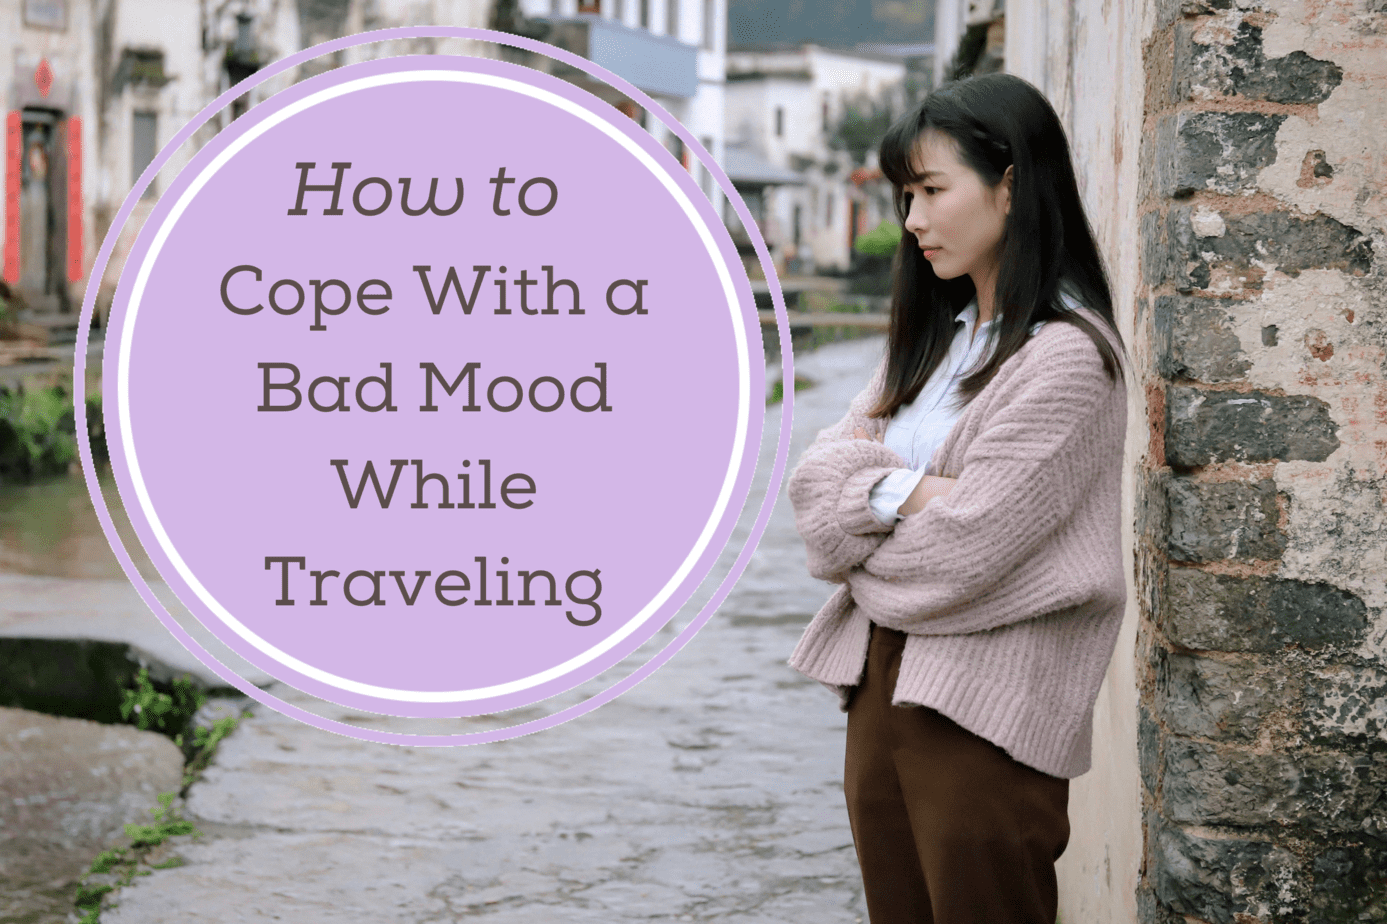 How to Cope with a Bad Mood While Traveling